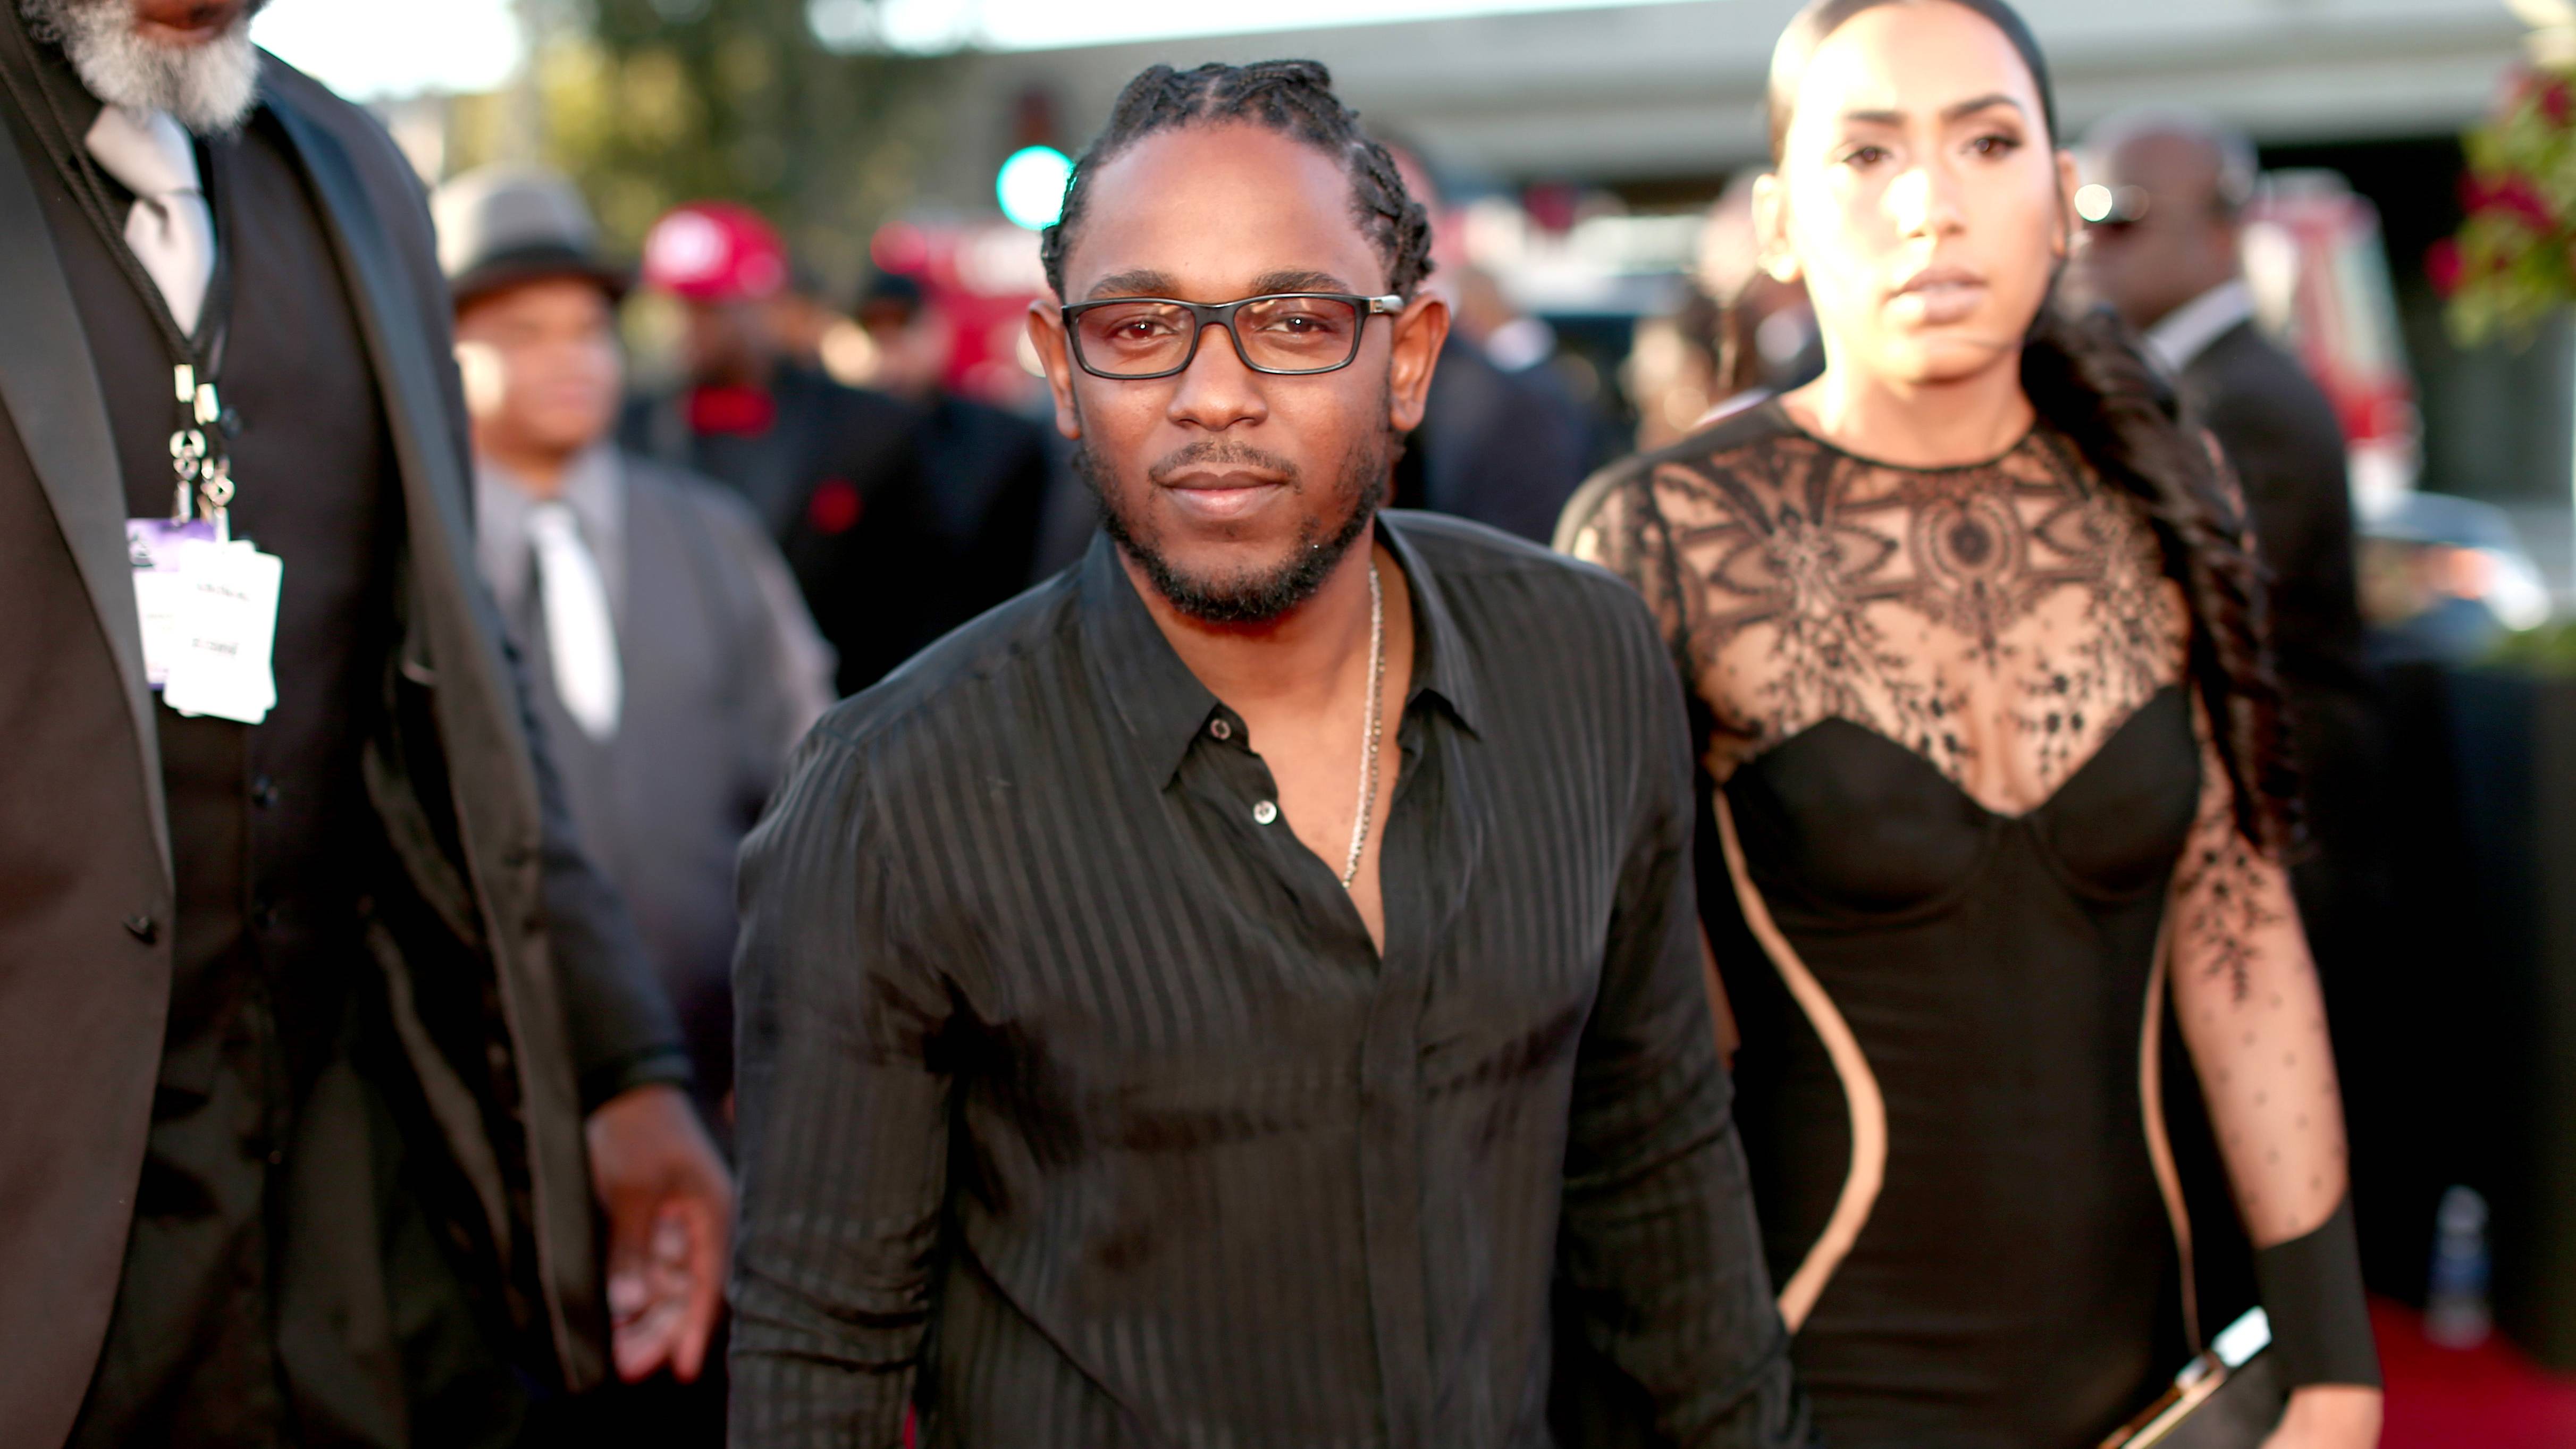 LOS ANGELES, CA - FEBRUARY 15:  Rapper Kendrick Lamar (C) and Whitney Alford attend The 58th GRAMMY Awards at Staples Center on February 15, 2016 in Los Angeles, California.  (Photo by Christopher Polk/Getty Images for NARAS)